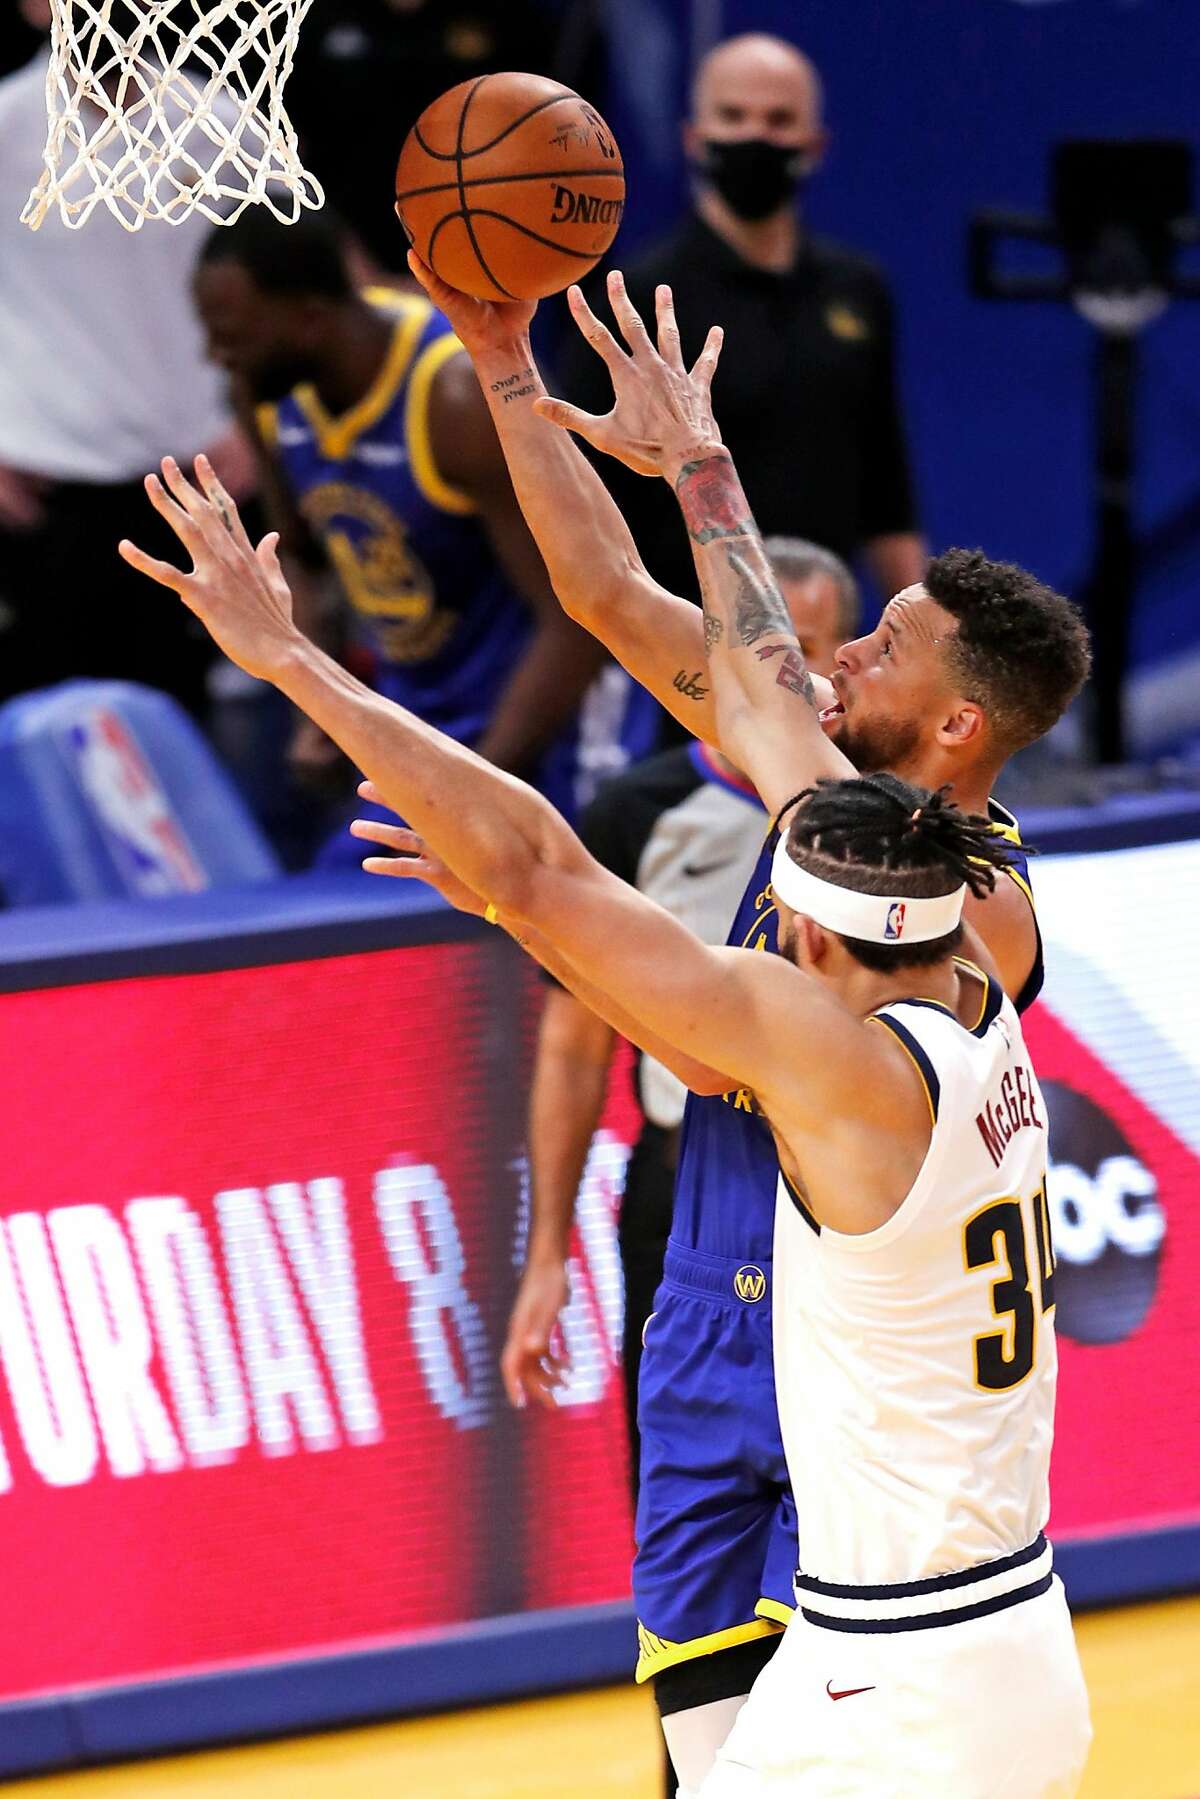 Golden State Warriors' Stephen Curry scores a basket against Denver Nuggets' JaVale McGee, passing Wilt Chamberlain for most points in franchise history, during 1st quarter of NBA game at Chase Center in San Francisco, Calif., on Monday, April 12, 2021.